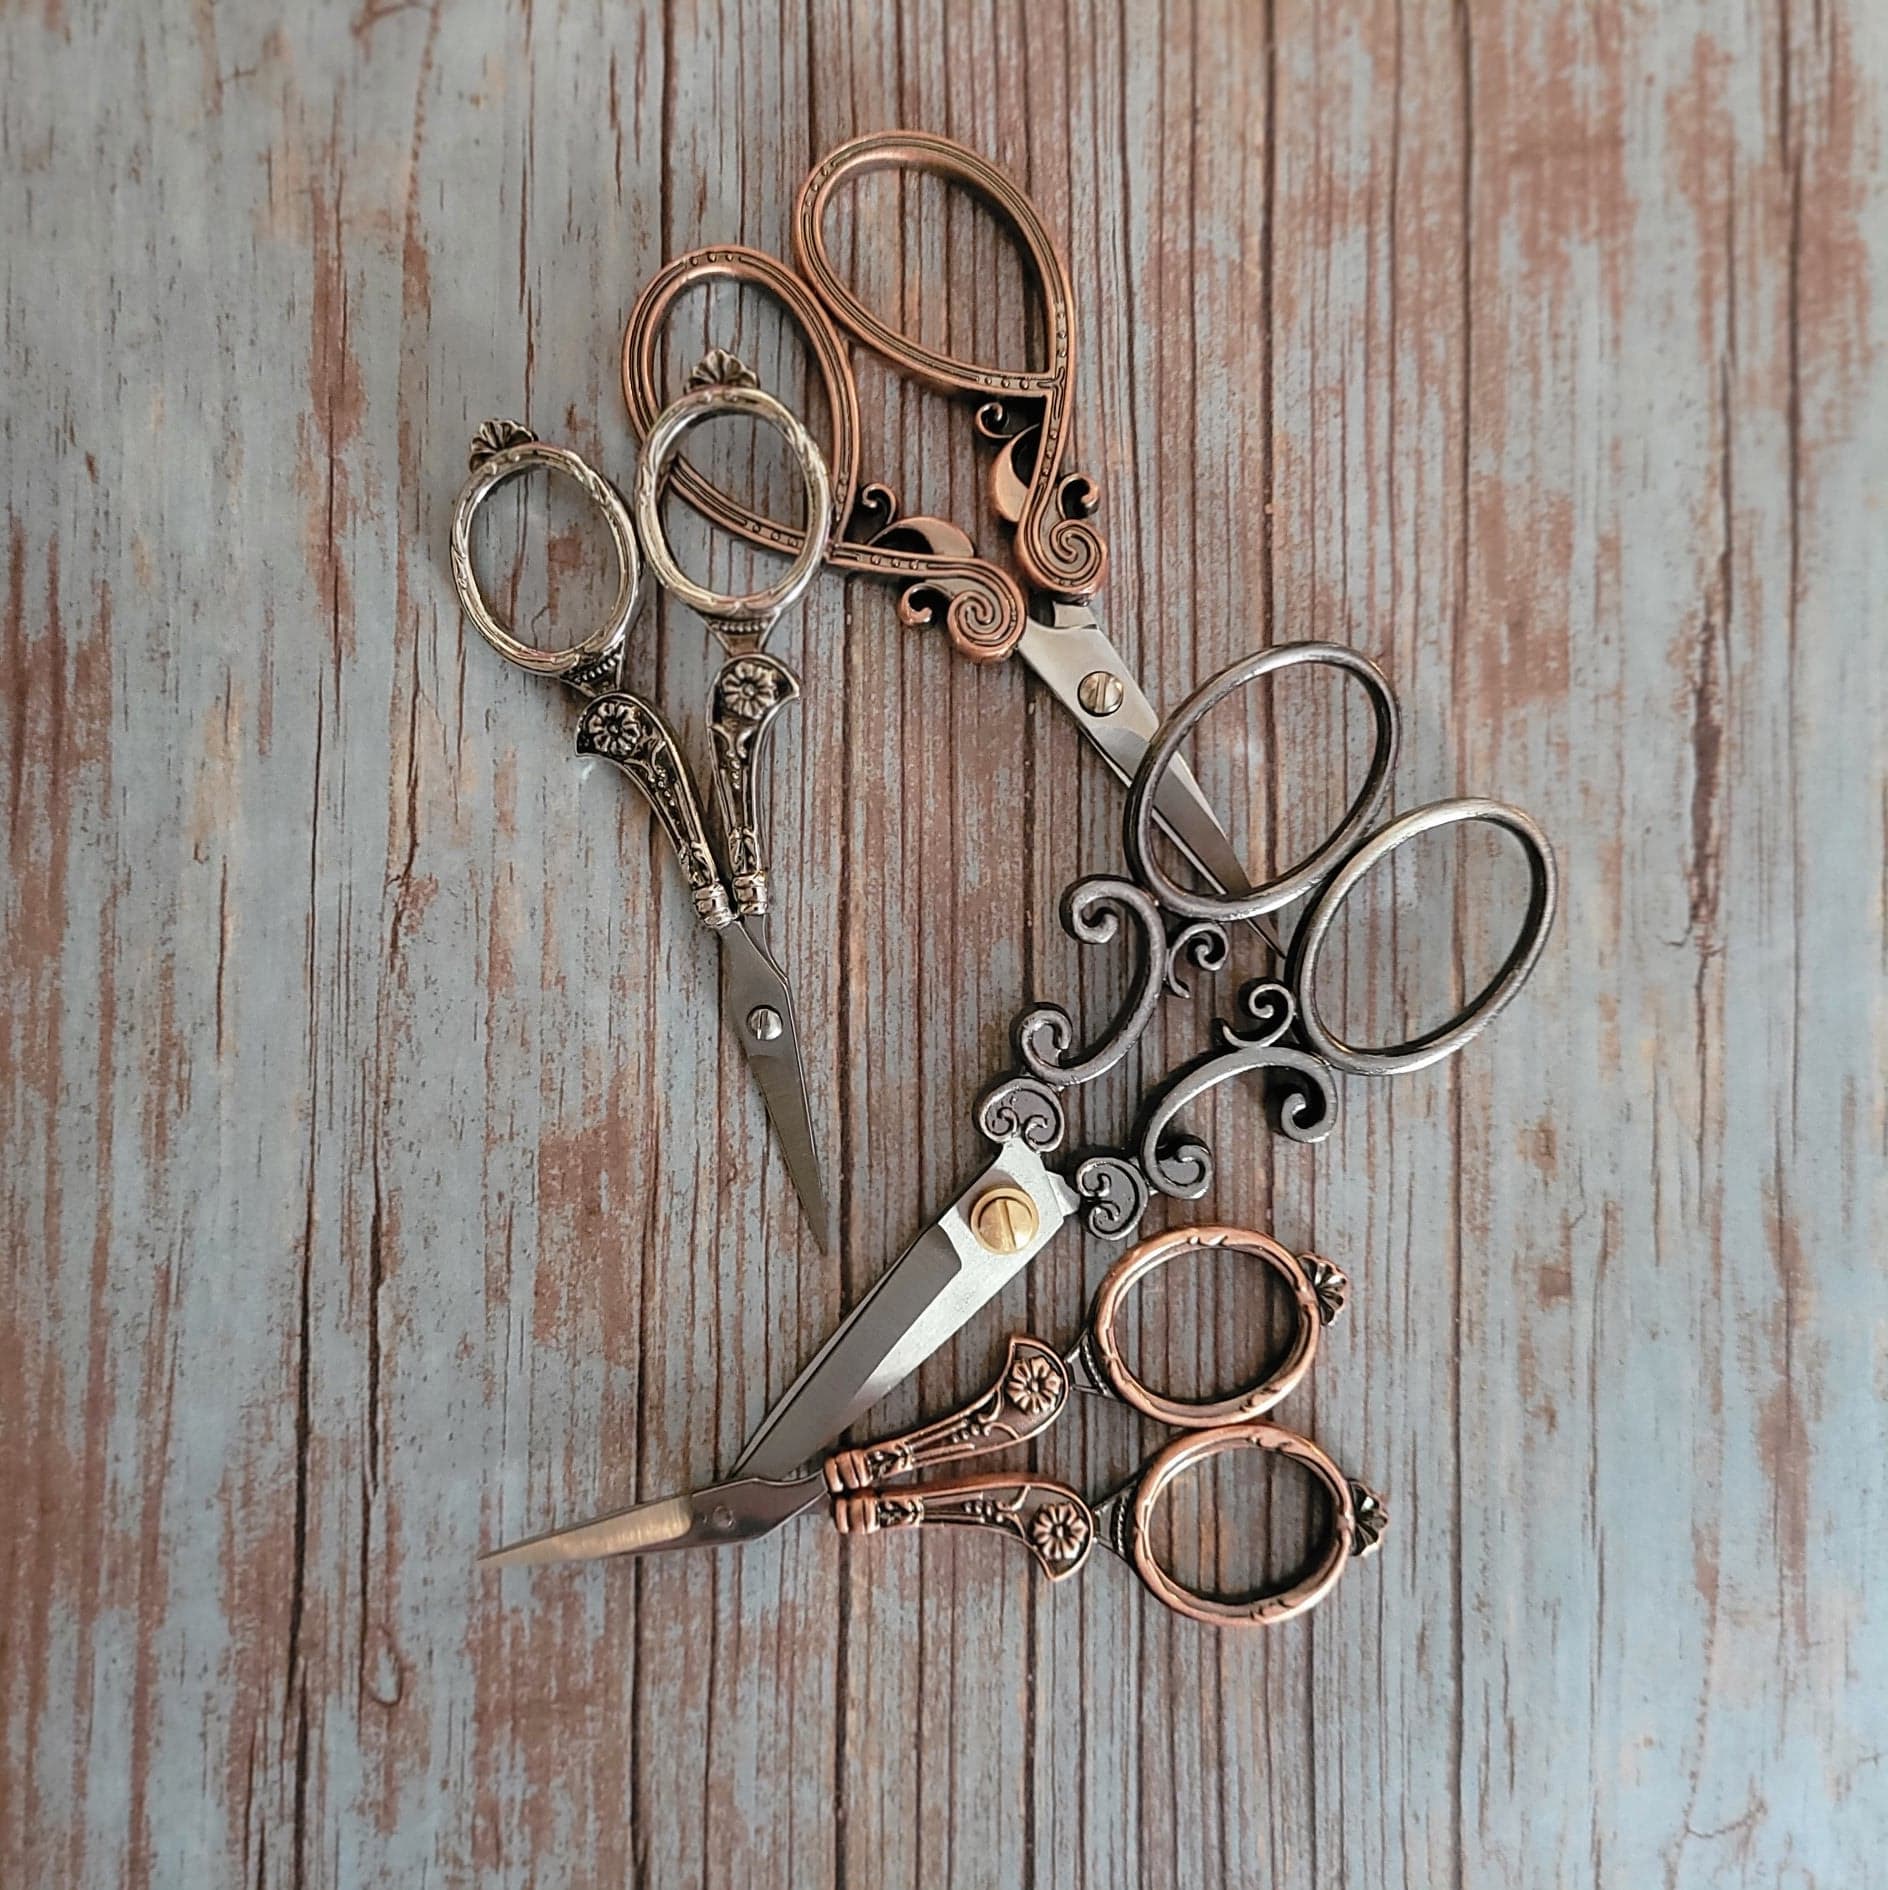 Vintage-Inspired Scissors – themoonmanual